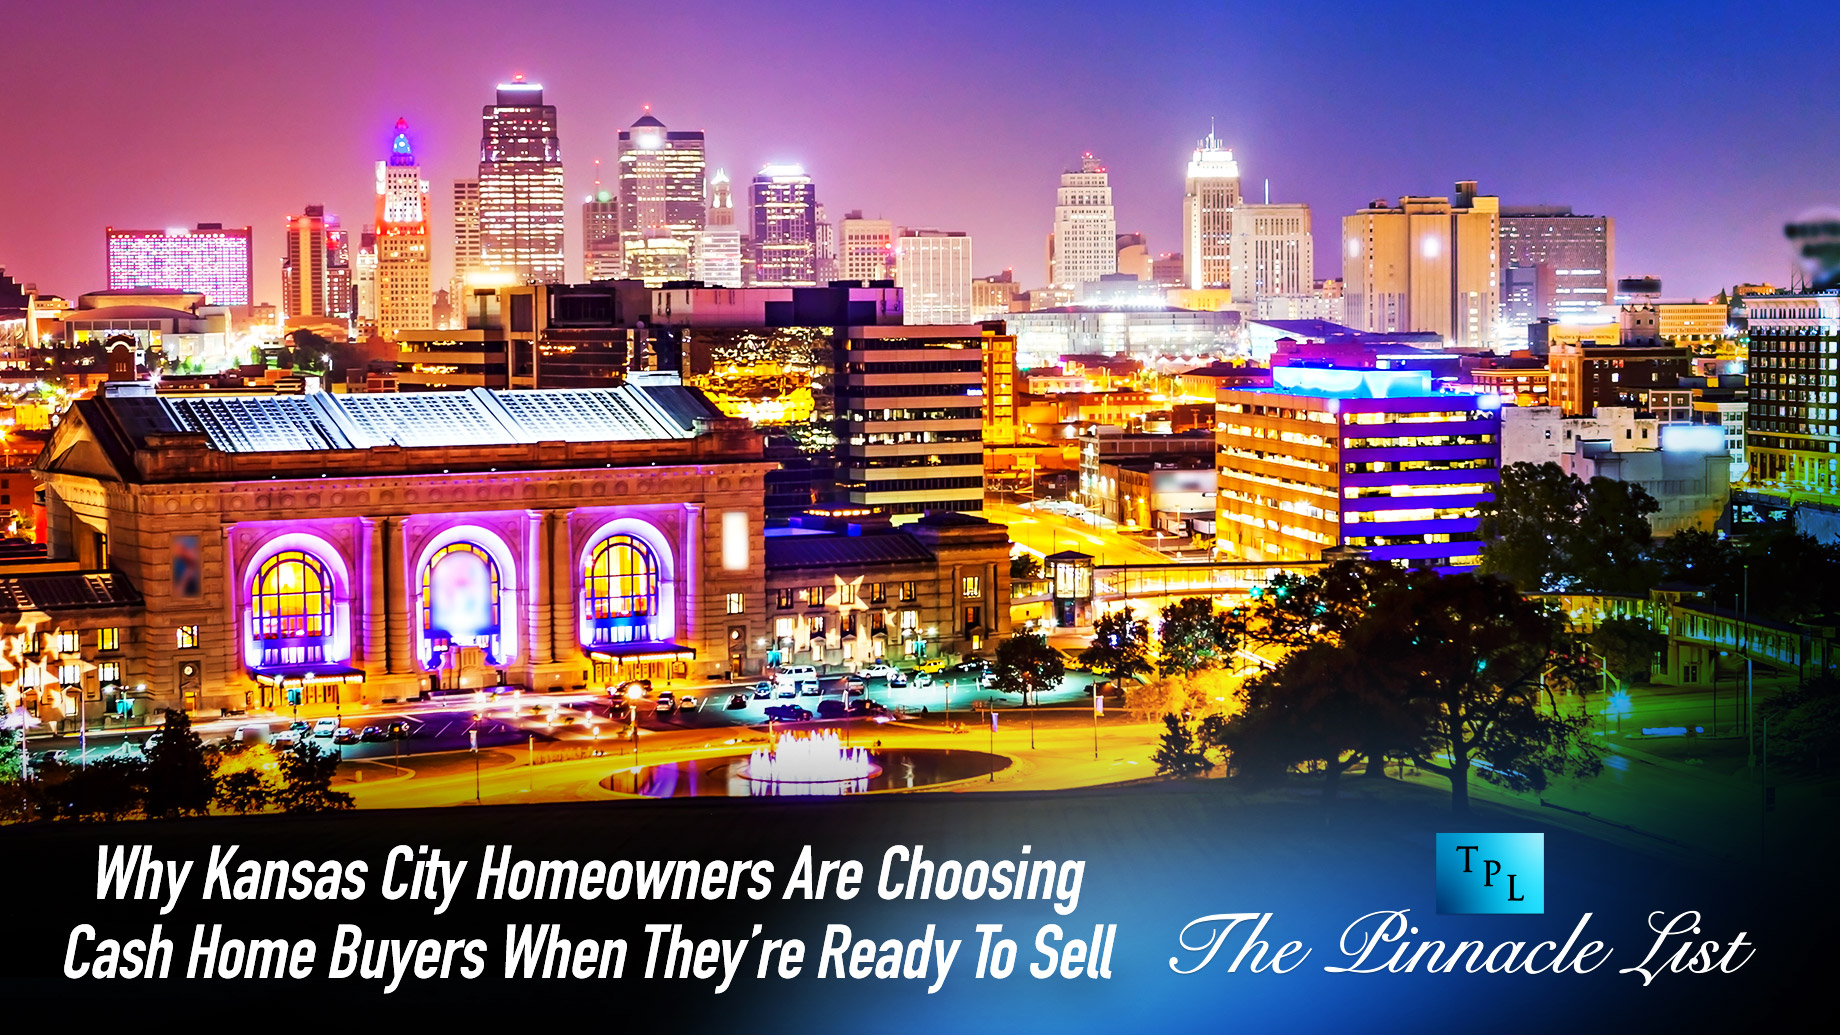 Why Kansas City Homeowners Are Choosing Cash Home Buyers When They’re Ready To Sell